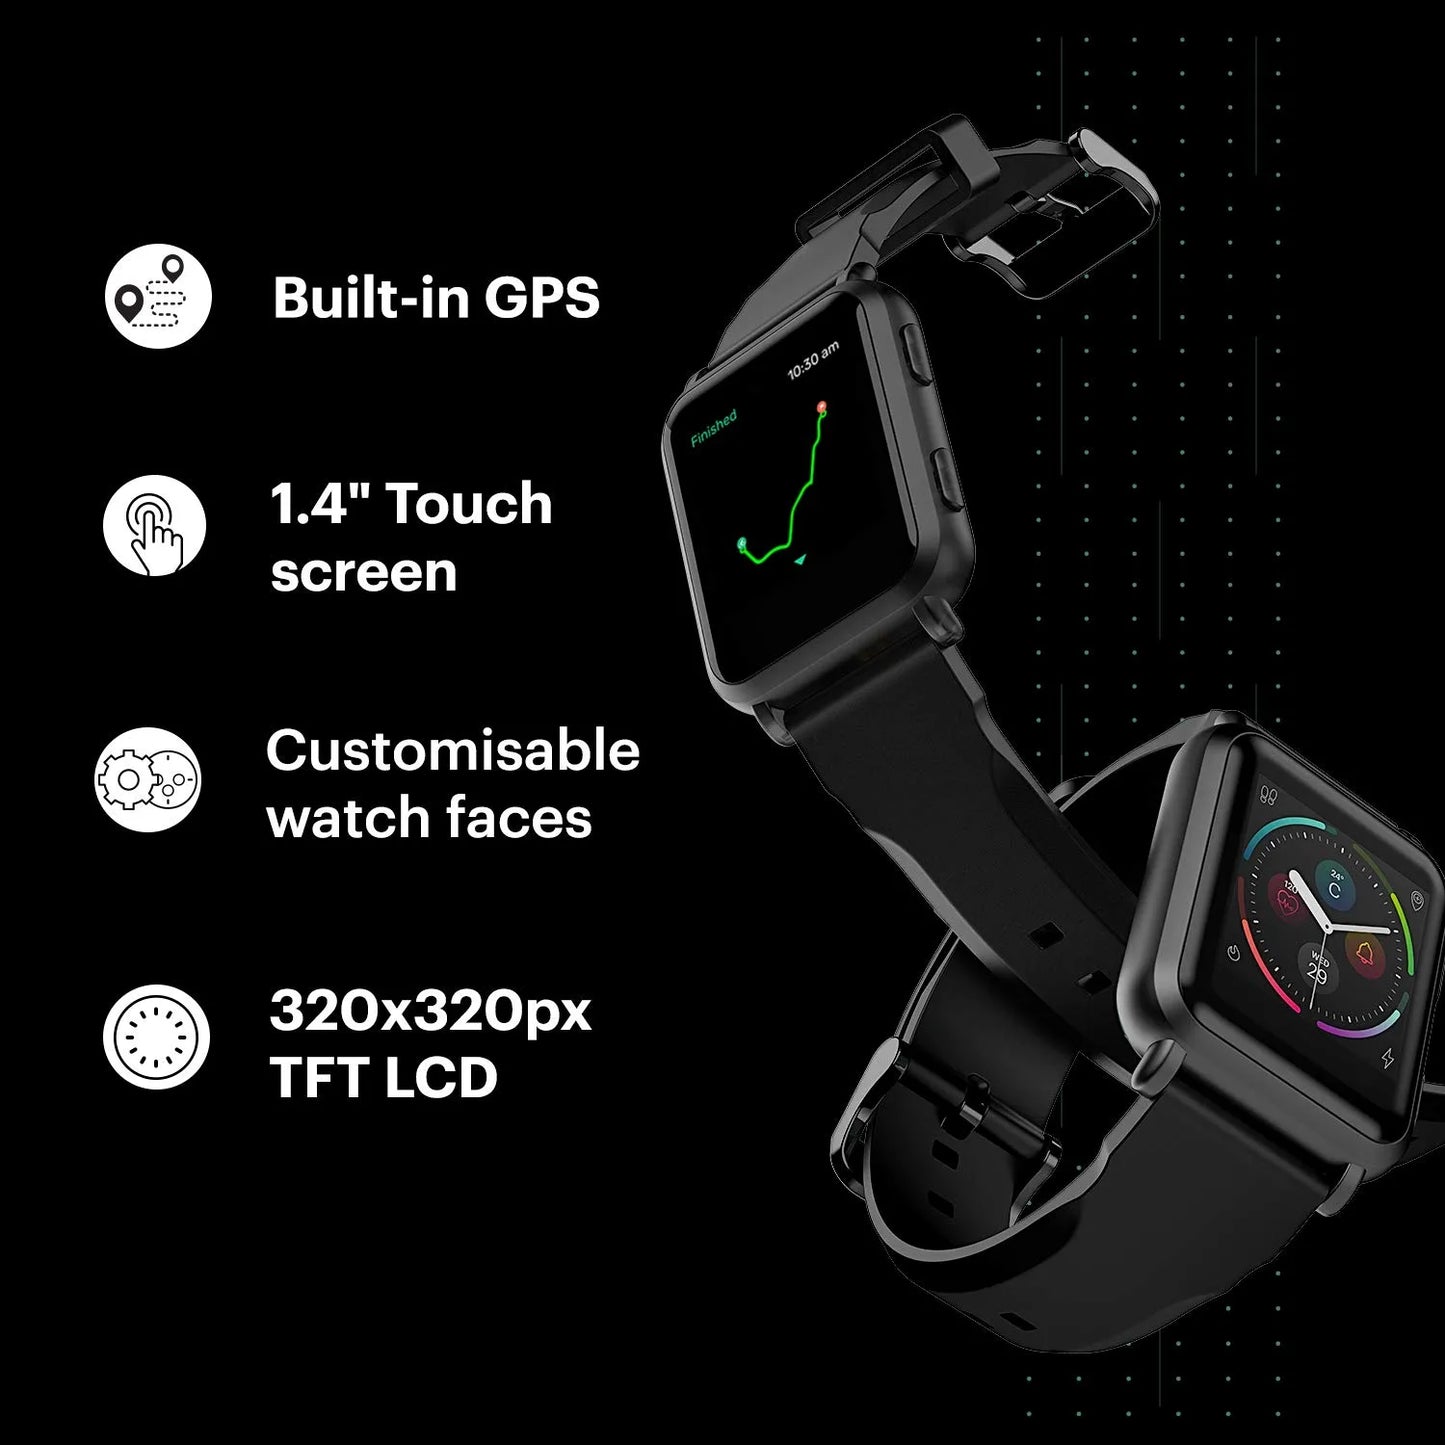 Noise ColorFit NAV Smart Watch with Built-in GPS and High Resolution Display (Stealth Black)